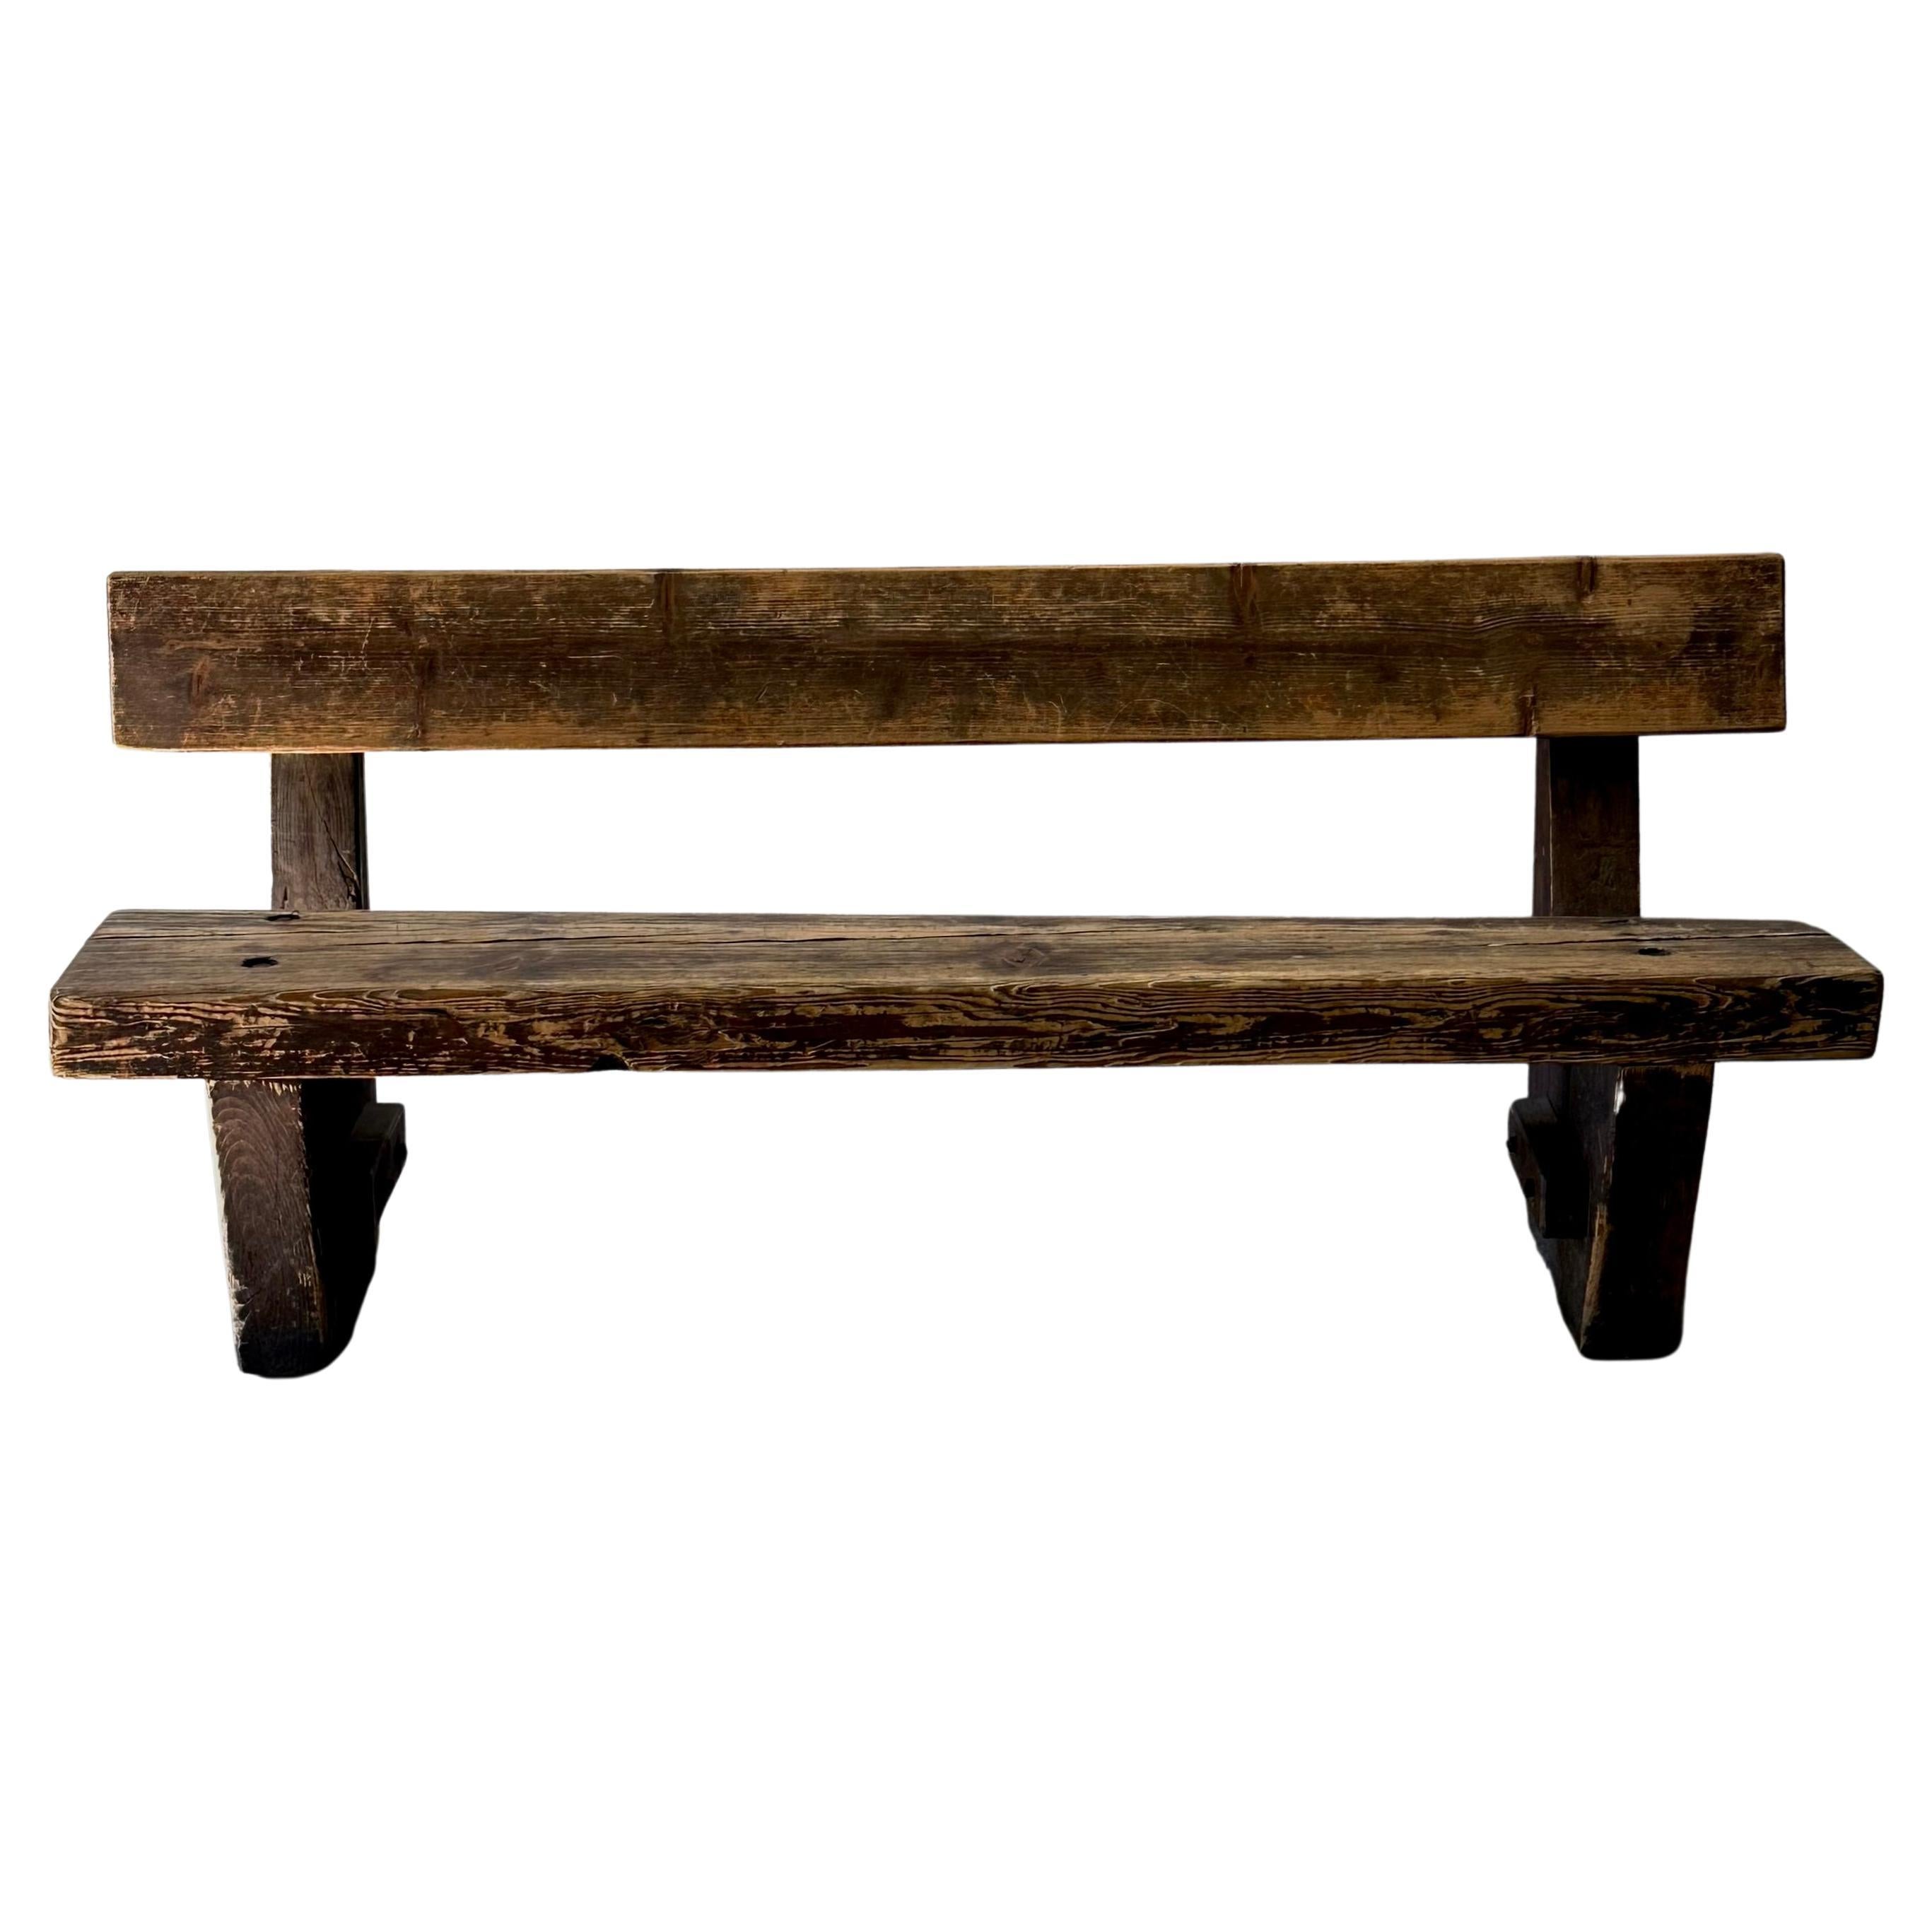 Rustic Wooden Pub Bench For Sale